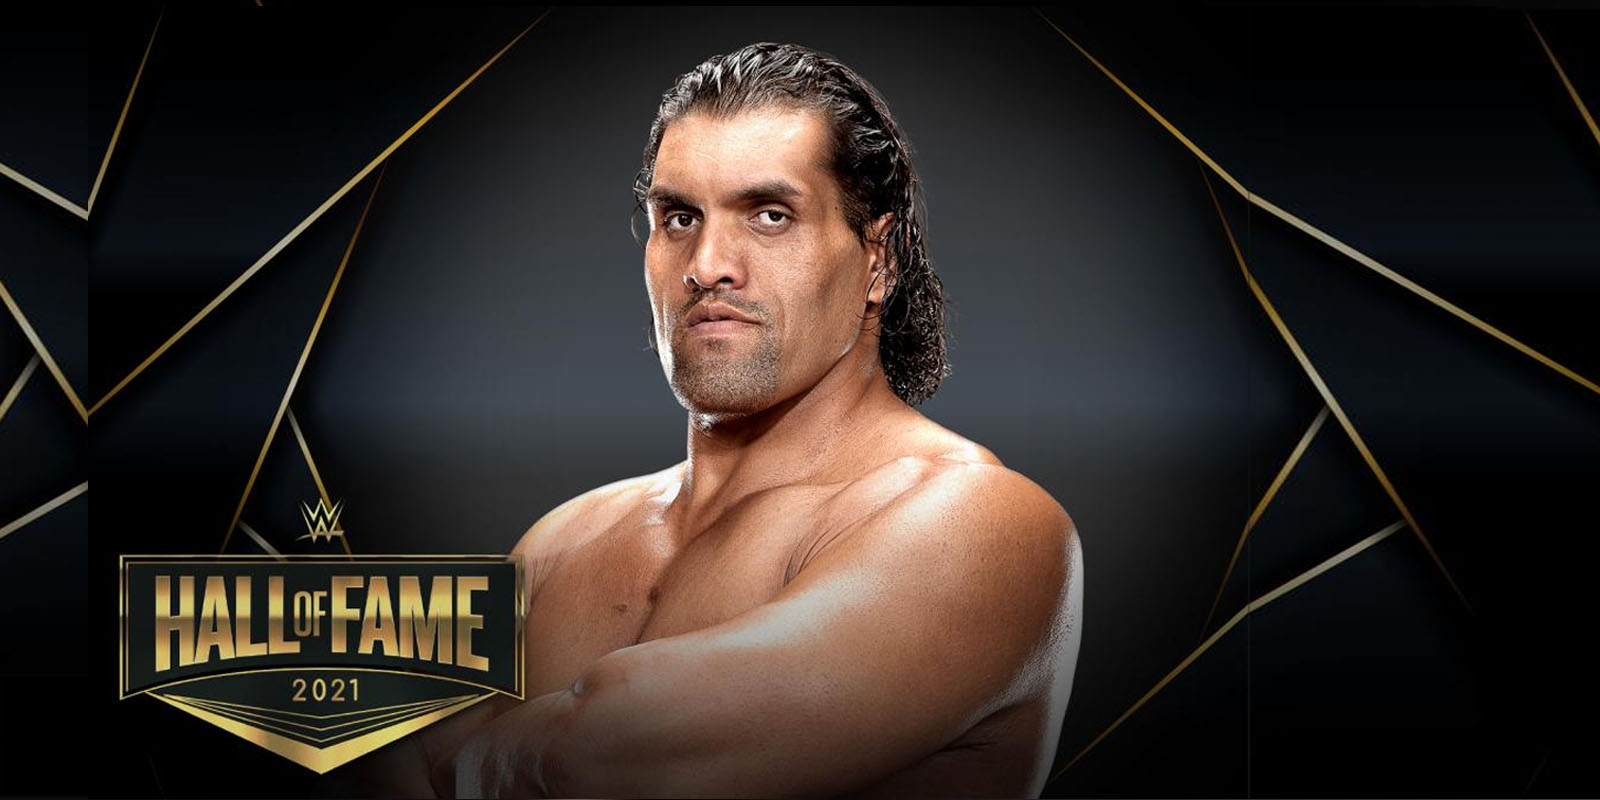 The Great Khali - Tallest WWE Wrestlers of All Time